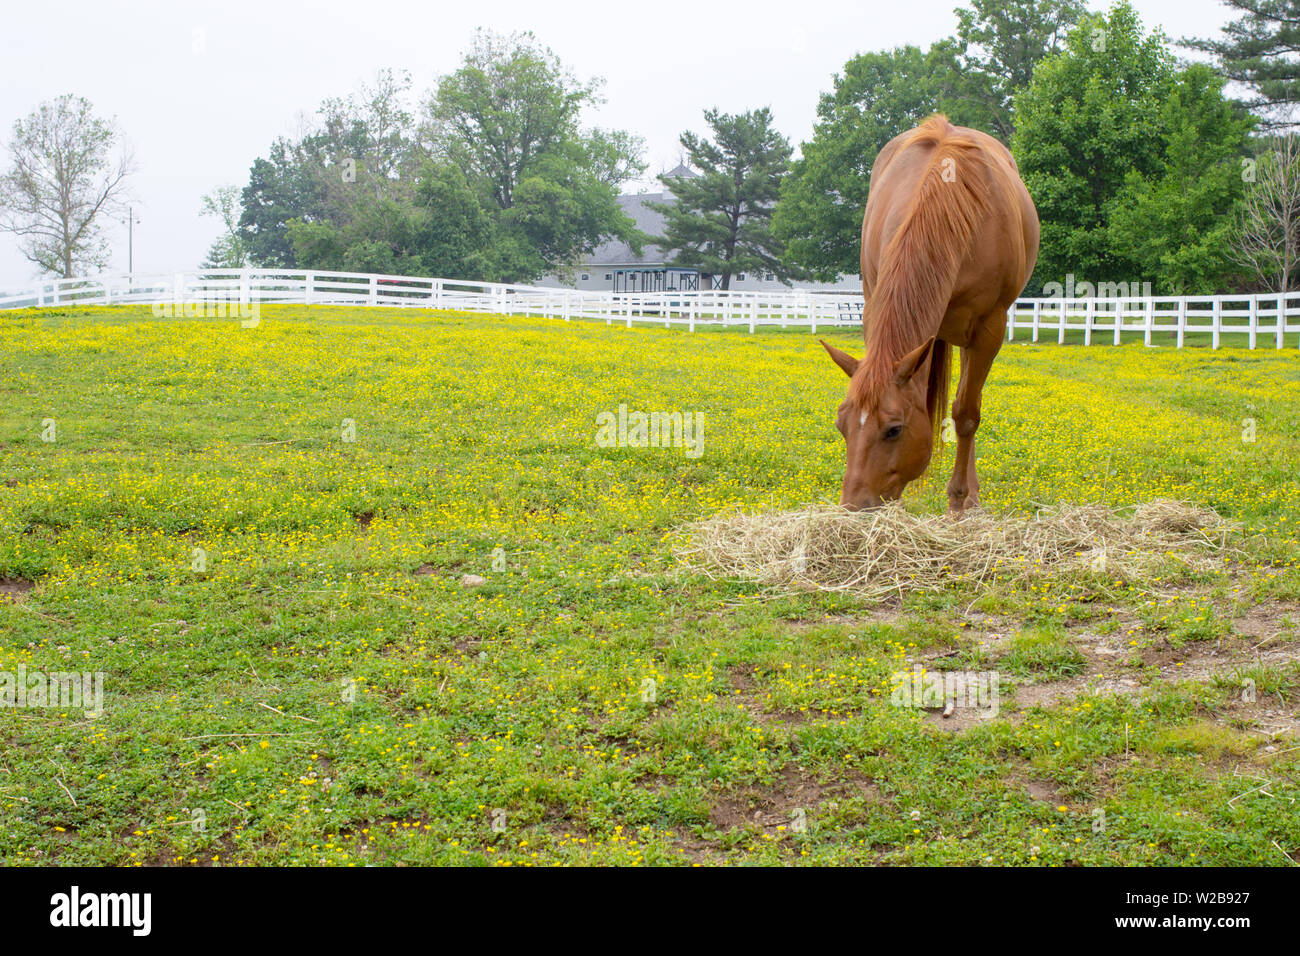 Lexington Kentucky Bluegrass Country. Thoroughbred horse grazes in a pastoral pasture surrounded by yellow wildflowers. Stock Photo